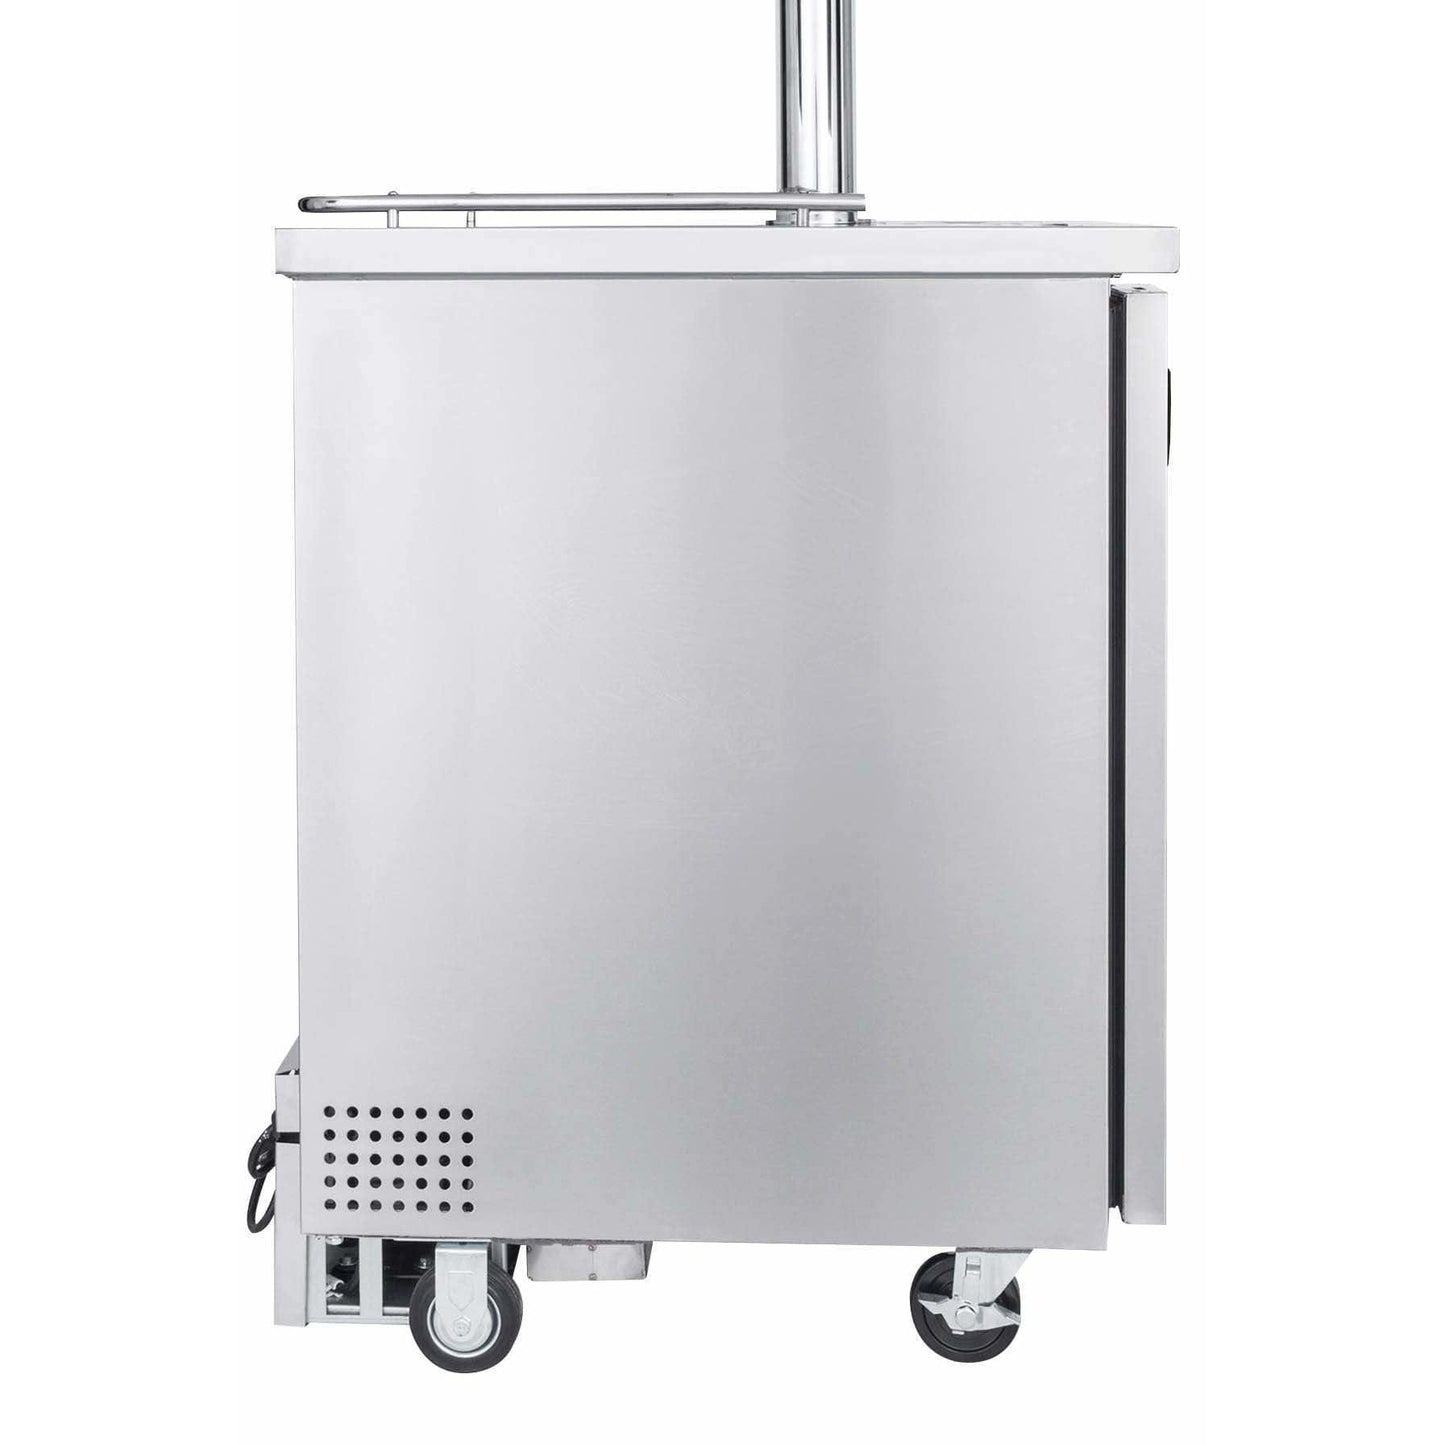 Kegco  24" Wide Single Tap All Stainless Steel with Keg Home Brew Kegerator HBK1XS-1K